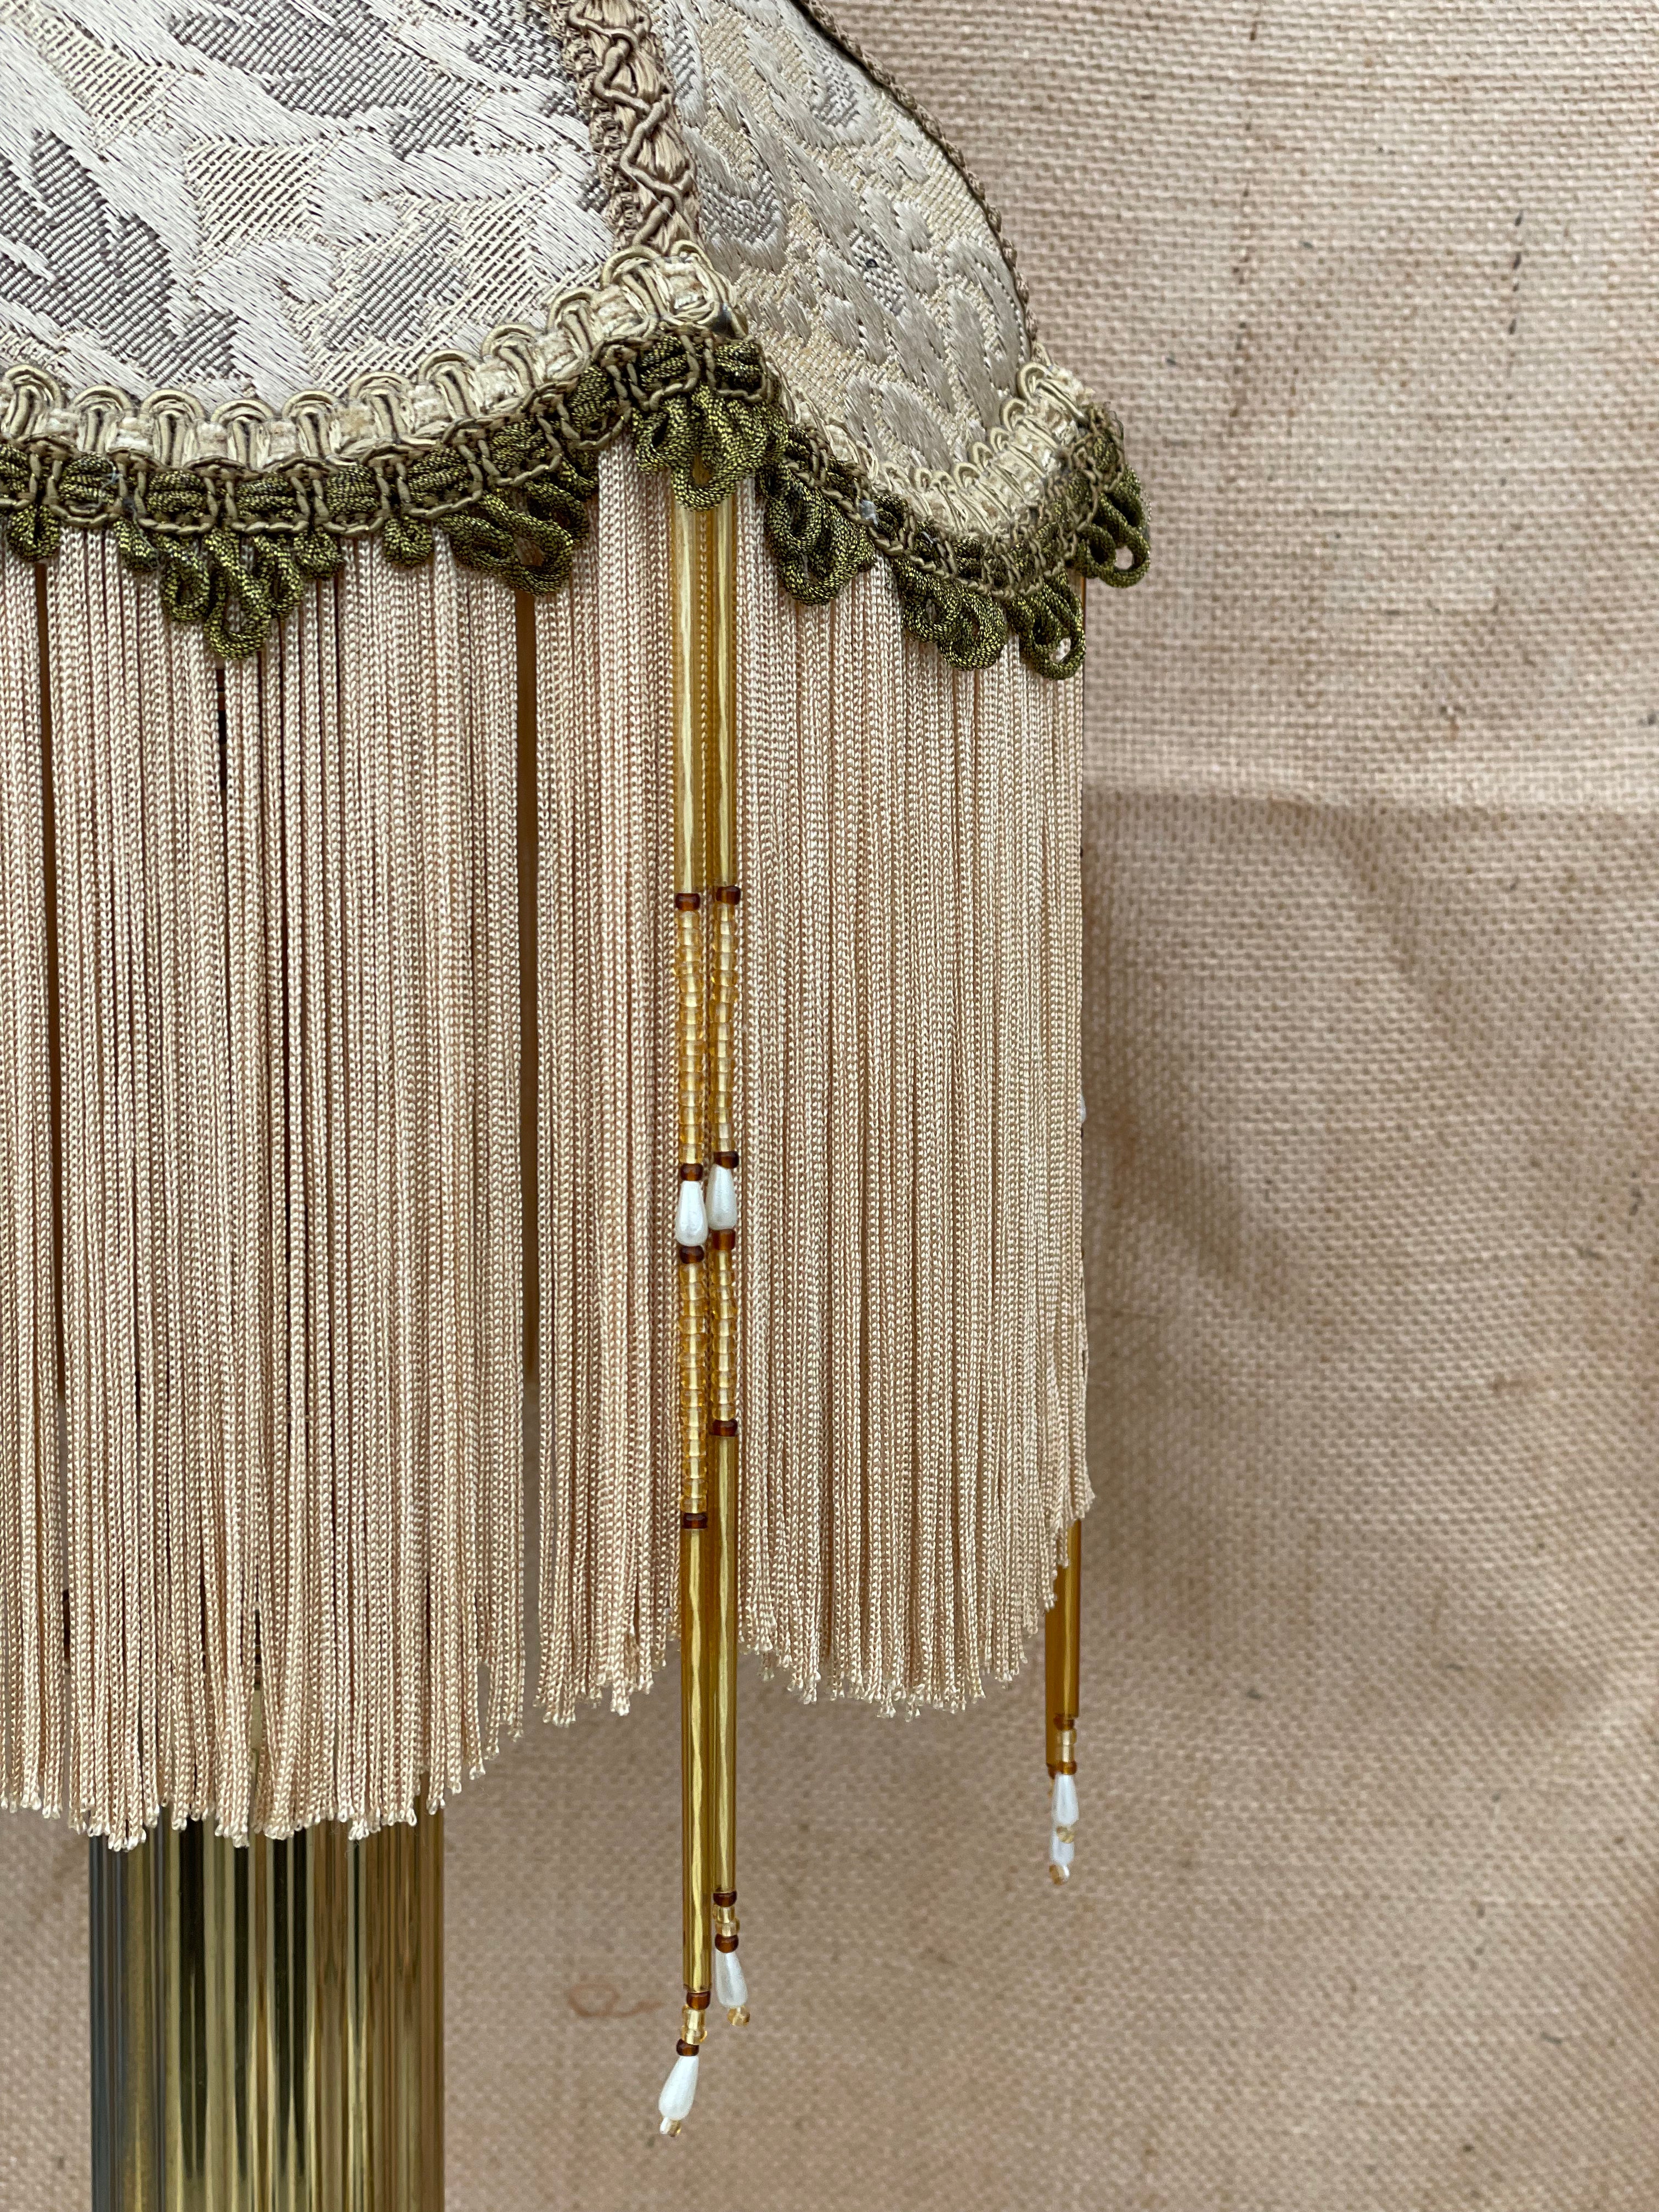 Antique Gold Lamp with Fringing & Tapestry